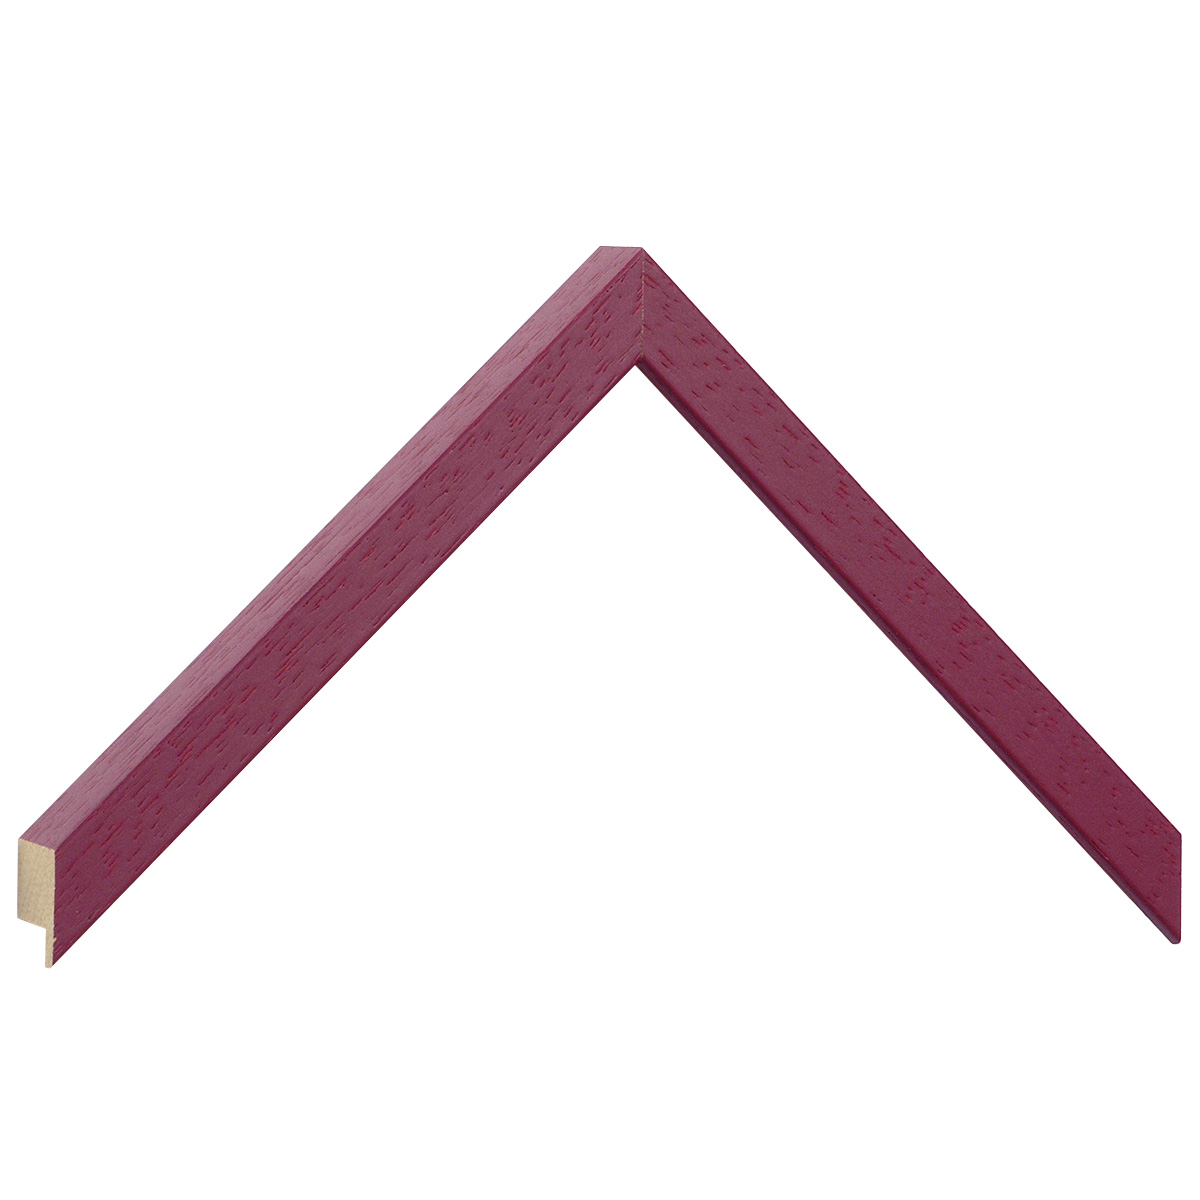 Moulding ayous, width 15mm height 25 - Raspberry - Sample